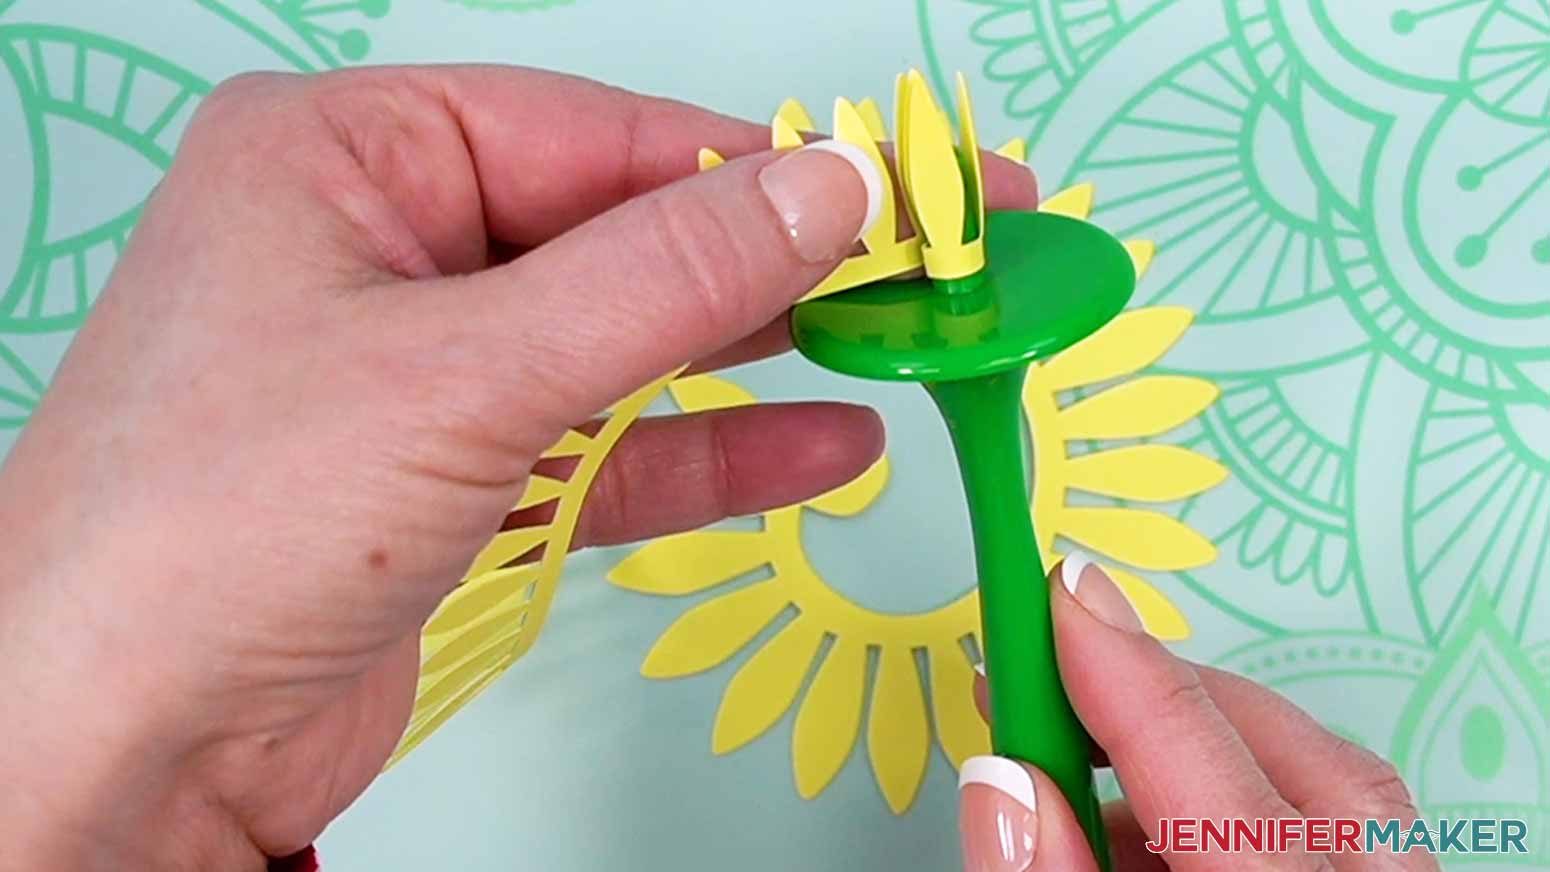 Wrap the petals around the center of the tool to create the sunflower.